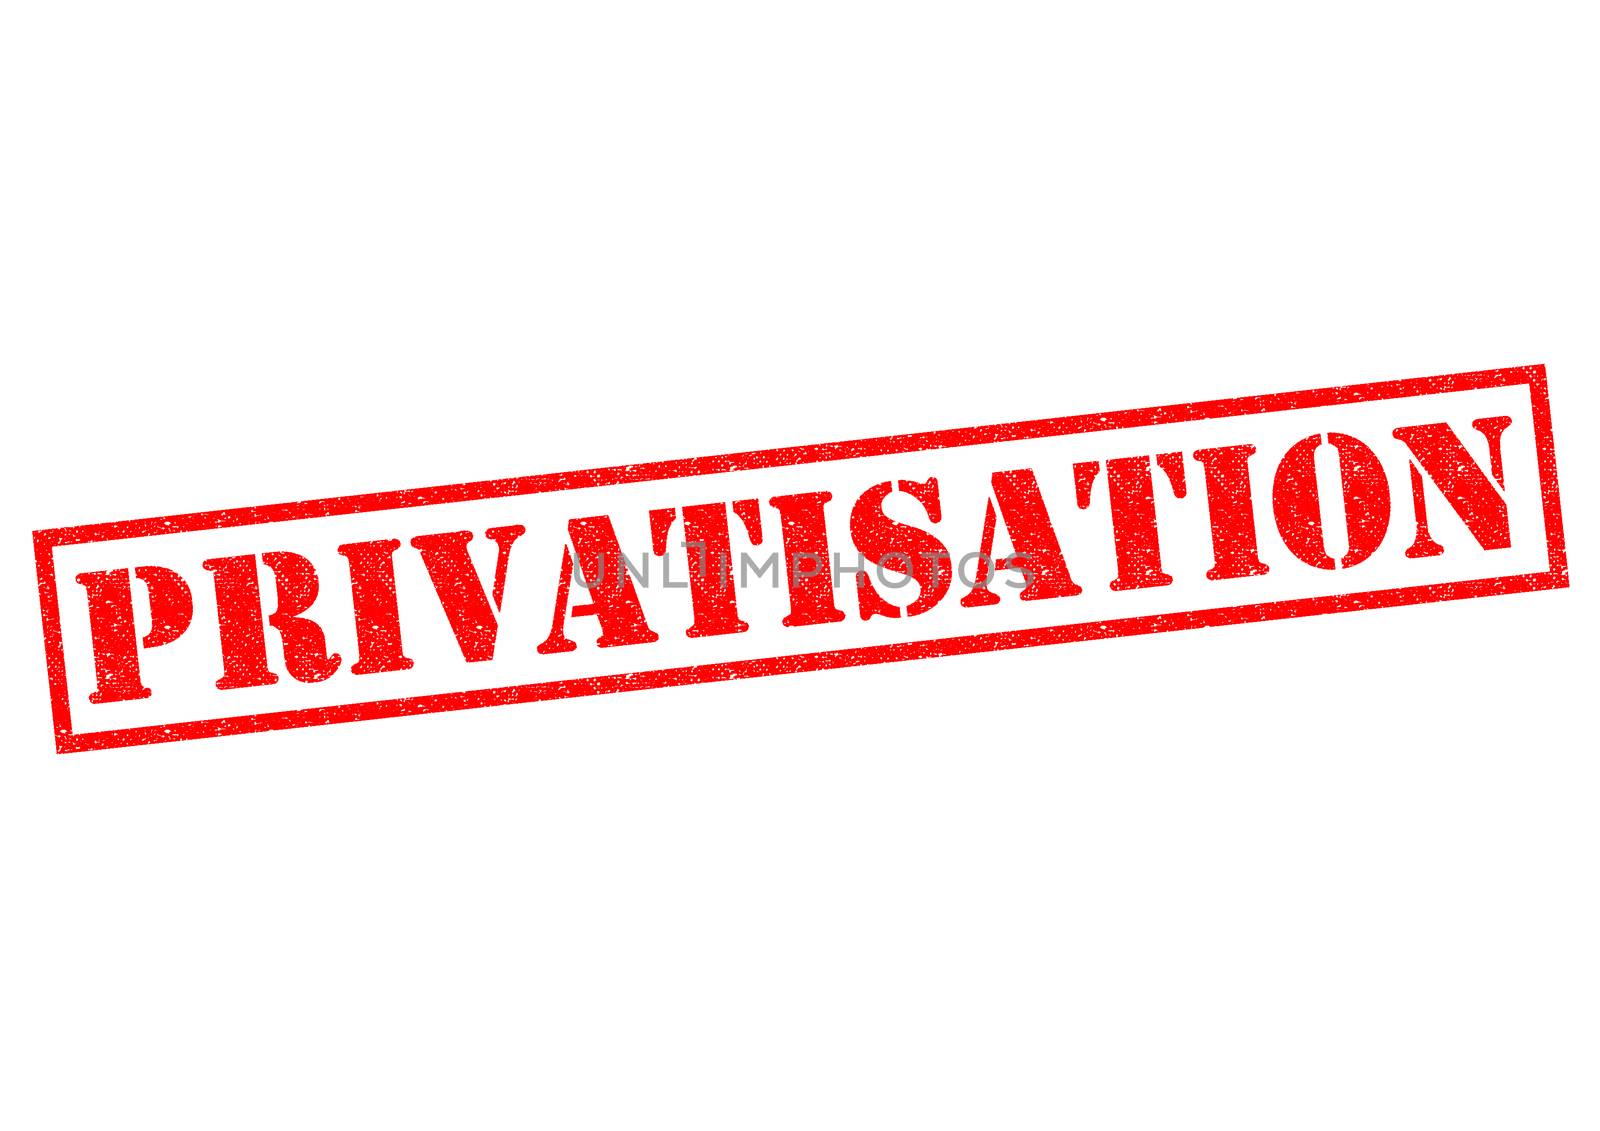 PRIVATISATION red Rubber Stamp over a white background.